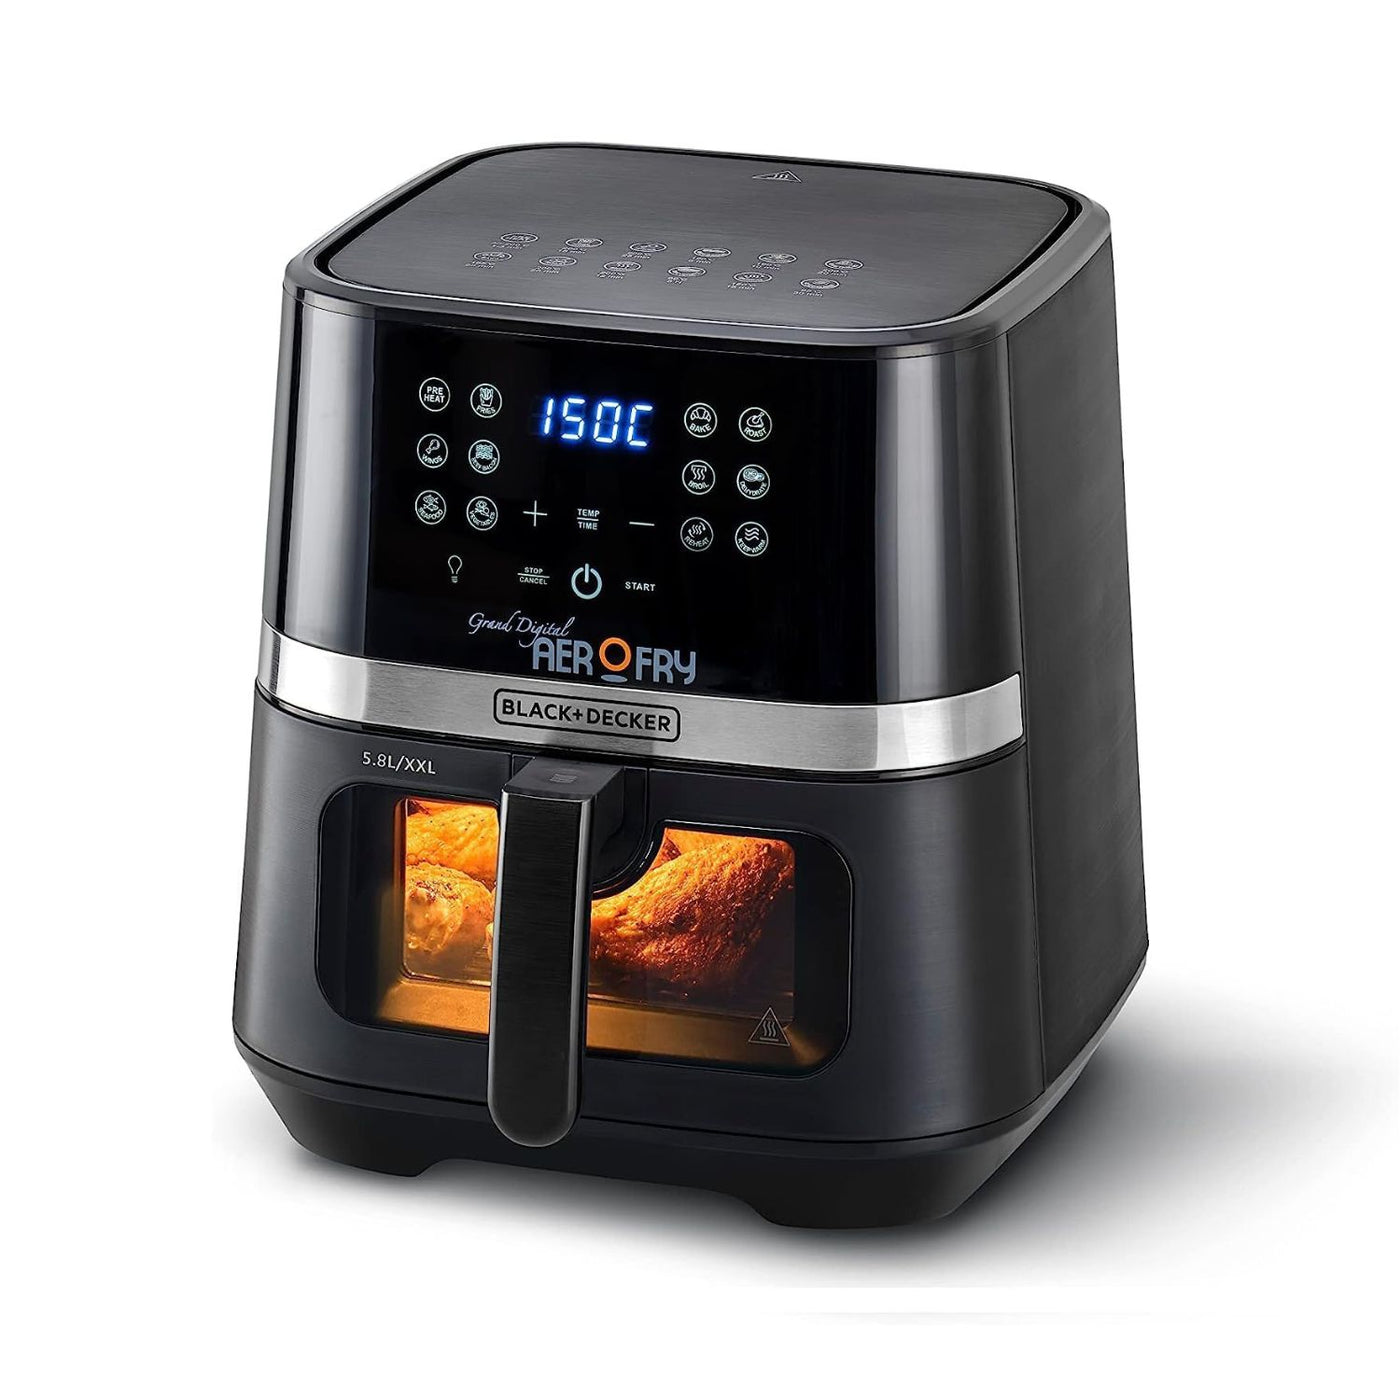 Digital 12-in-1 Multifunction Air Fryer With 2kg Capacity With Rapid Hot Air Circulation For Frying, Grilling, Broiling, Roasting, and Baking 5.8 L 1800 W AF5800-B5 Black